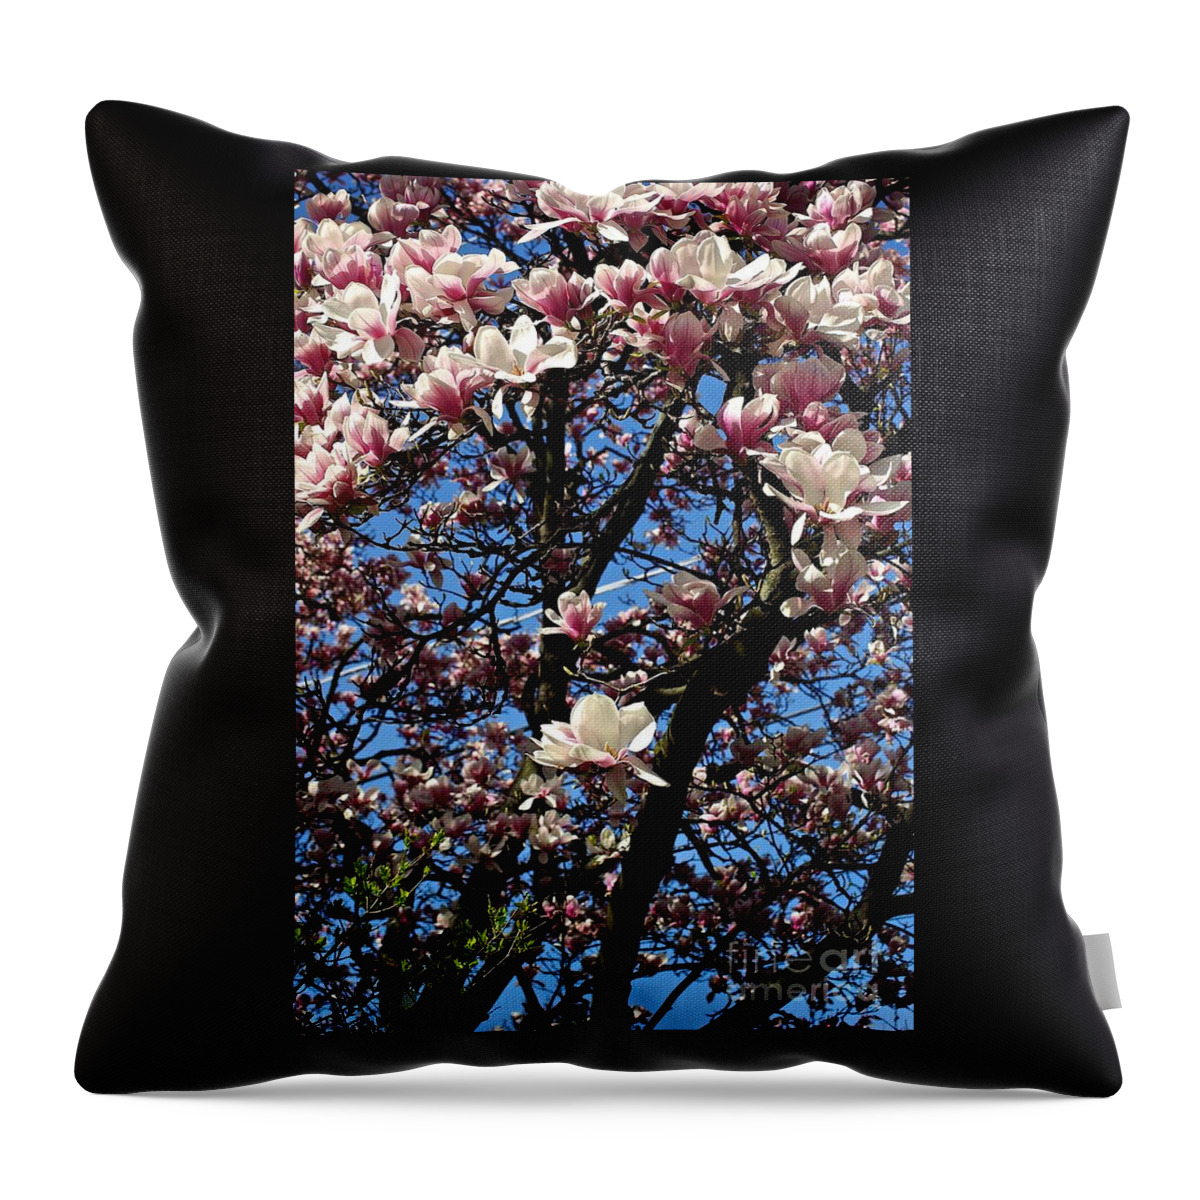 Magnolia Throw Pillow featuring the photograph Magnolias by Frank J Casella